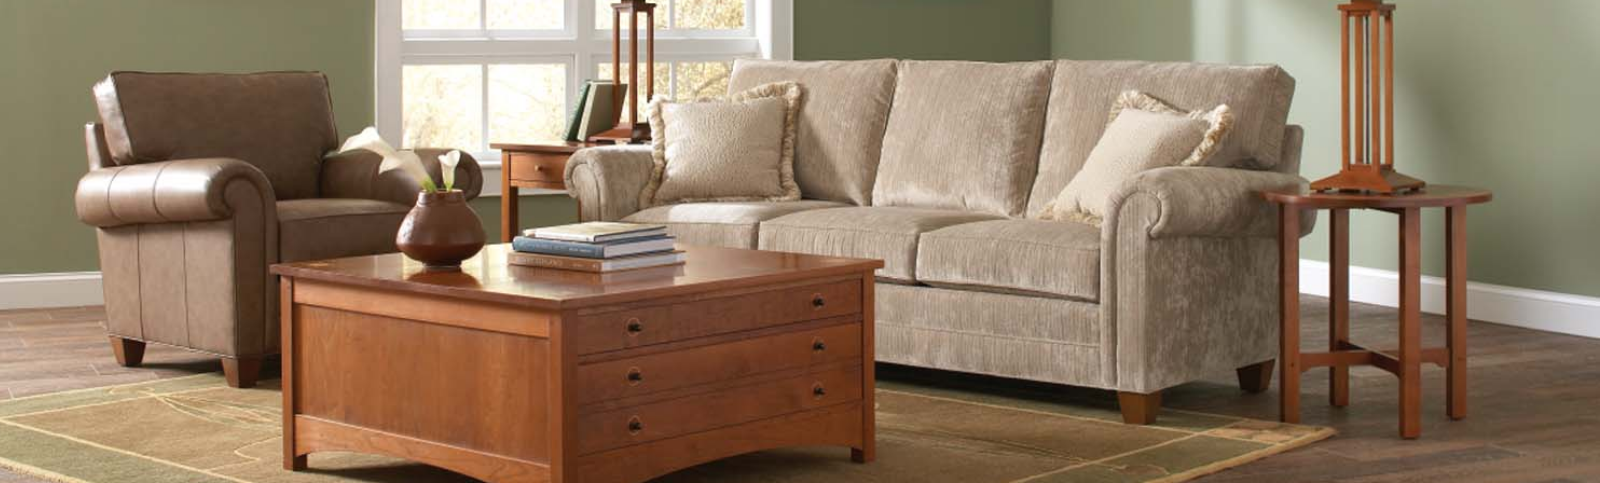 A beige colored couch, a brown chair, and wooden coffee tables and end tables with accessories on top of them